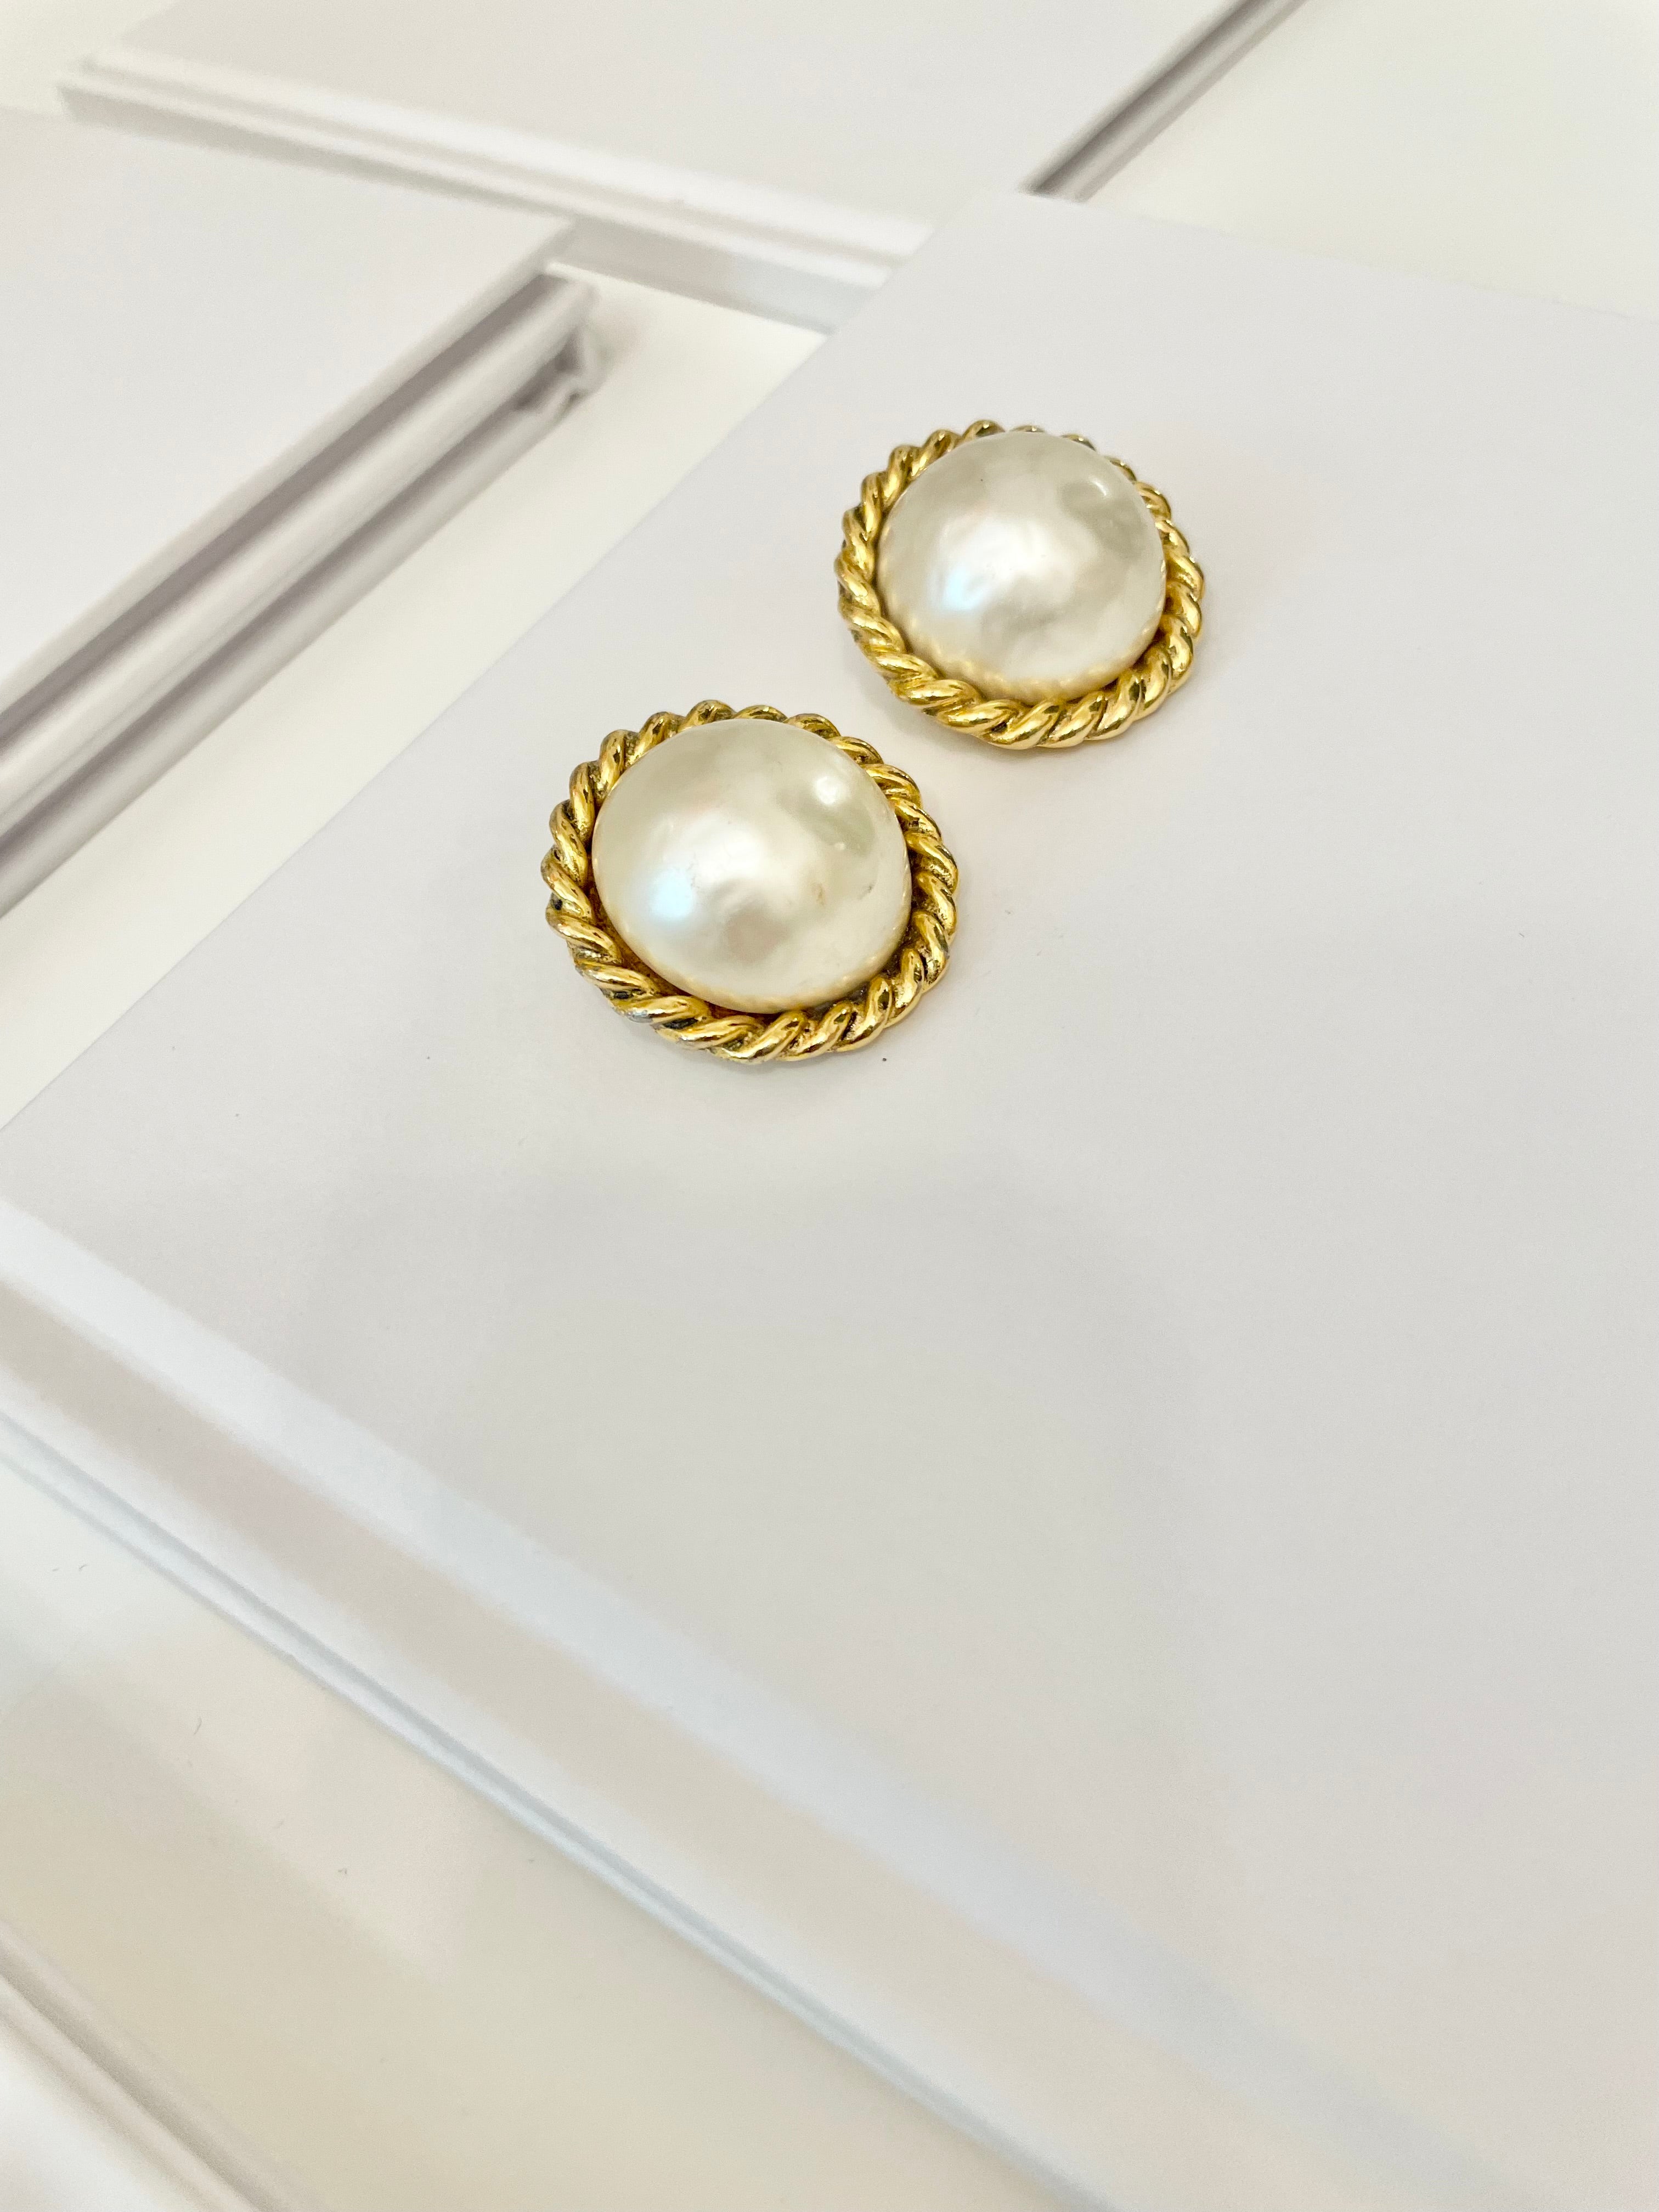 Truly classy Carol Lee stunning pearl clip earrings, framed in a braided gold! Timeless design..